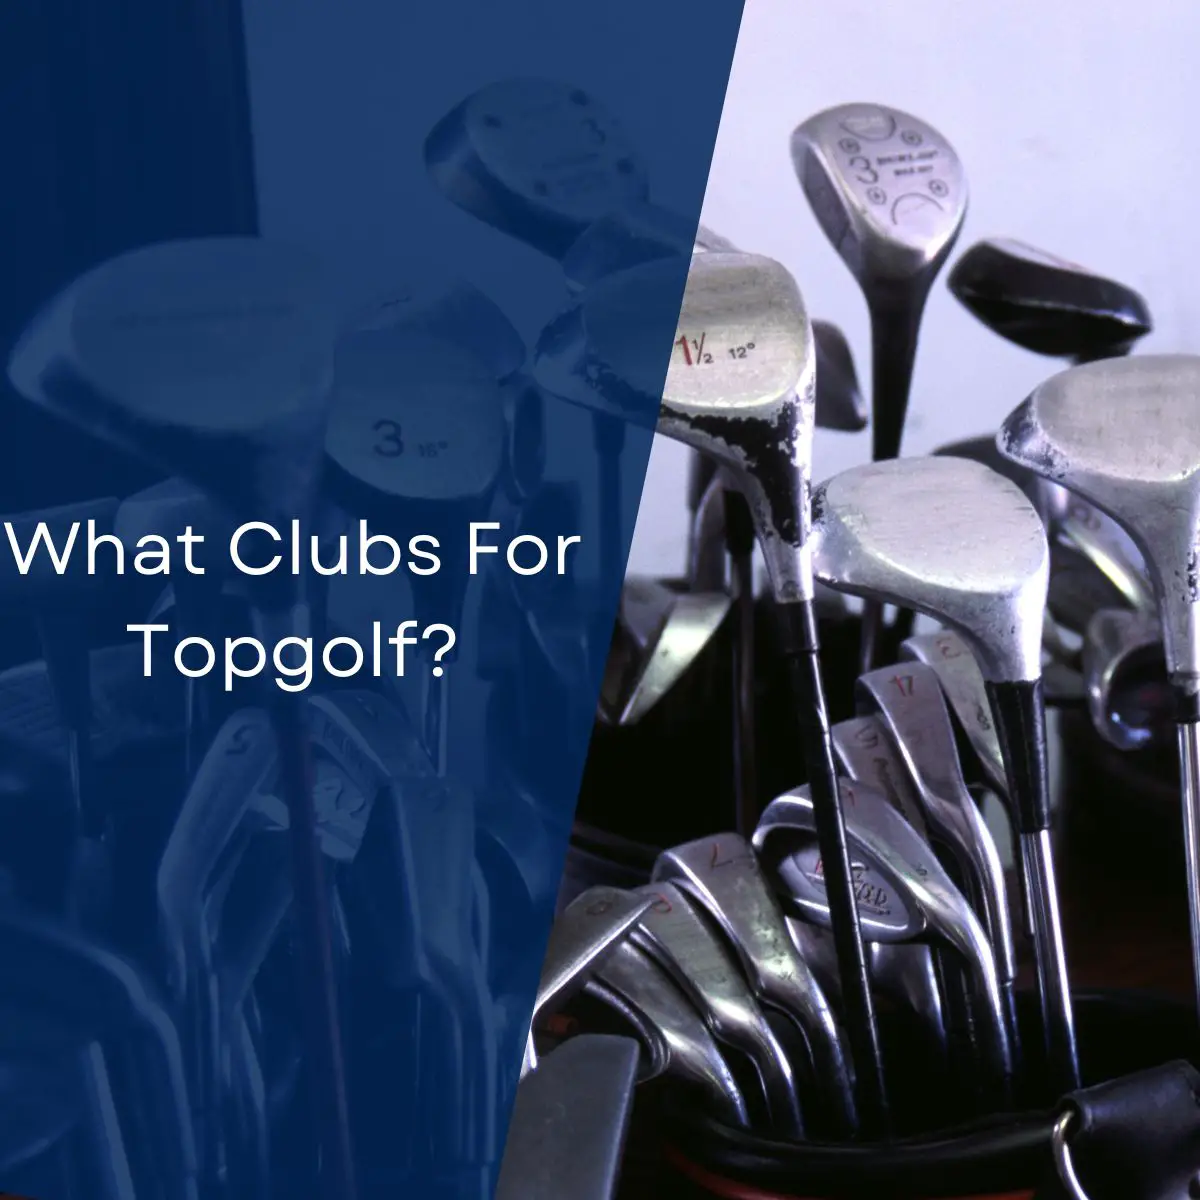 What Clubs For Topgolf?